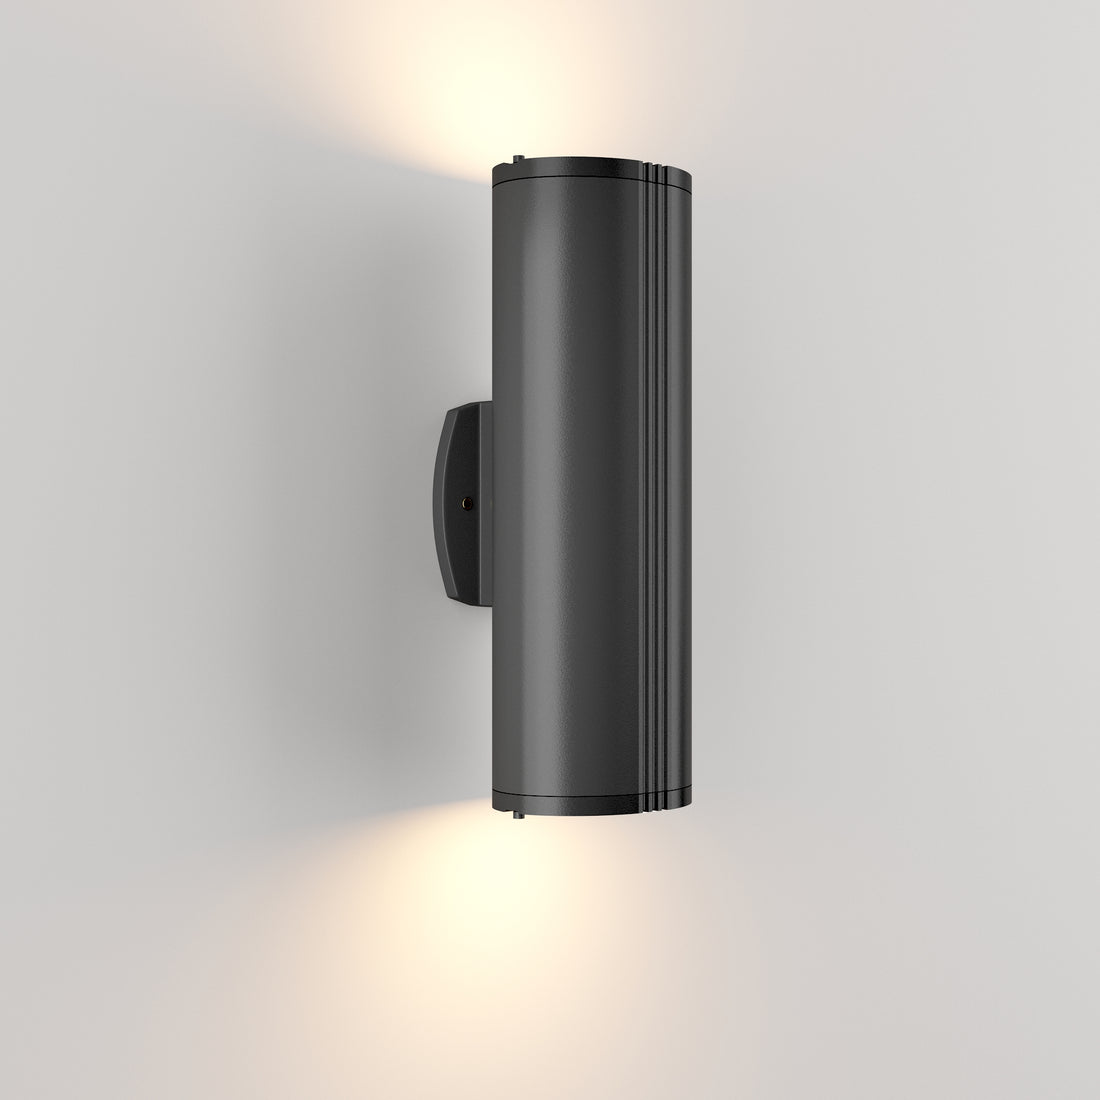 Evolution • Oval lined wall light with integrated LED 20 watts [1822]